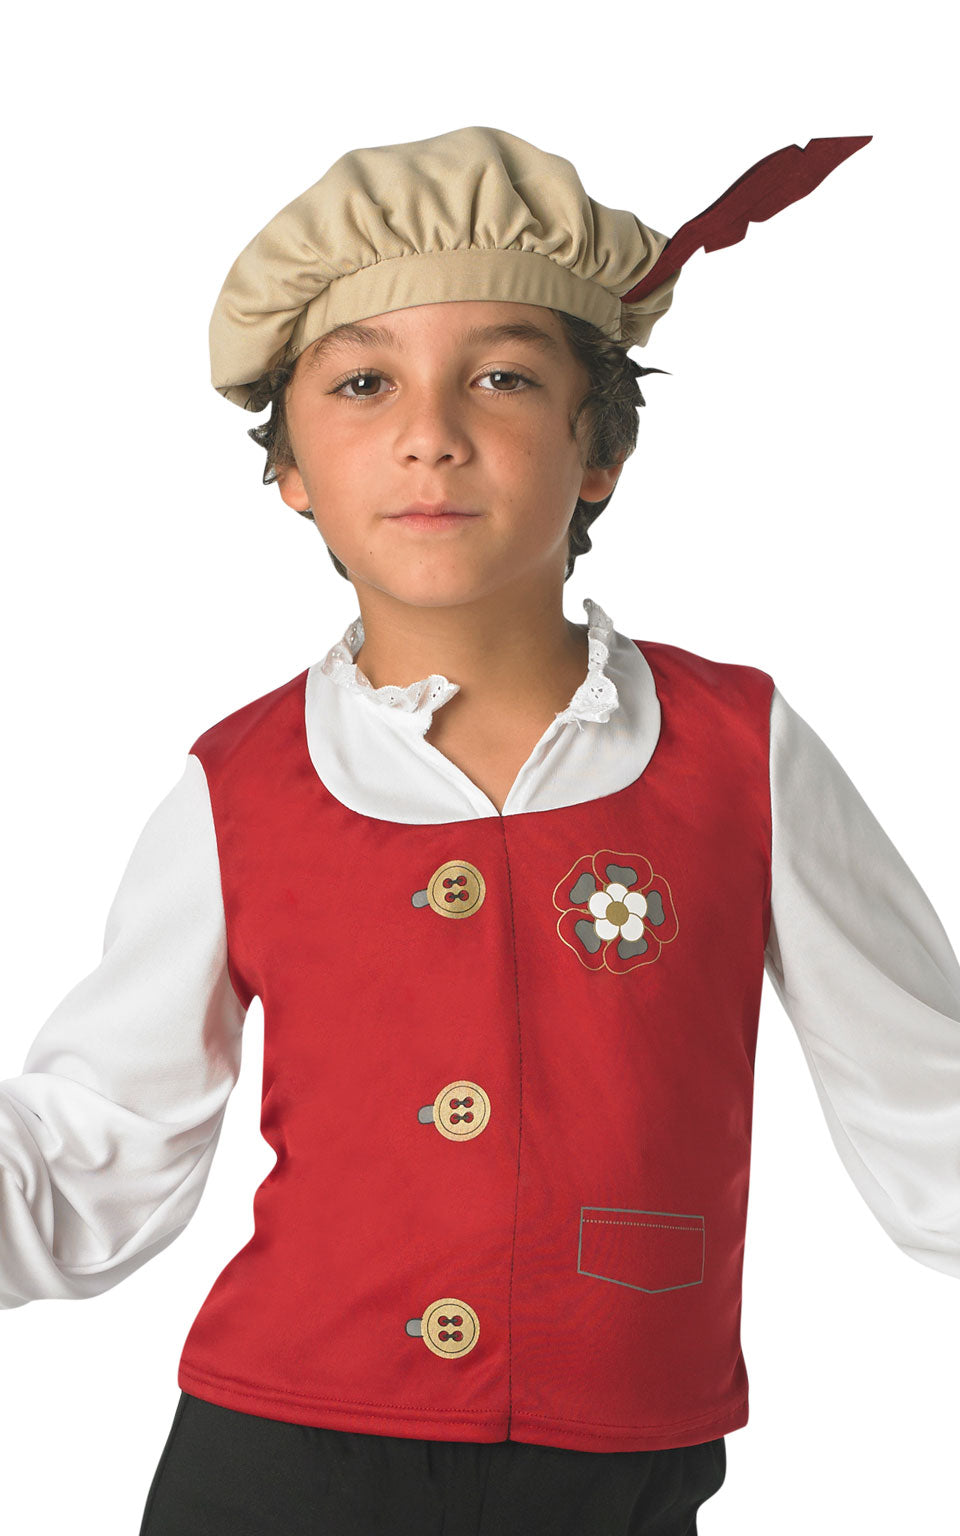 Tudor Boy Fancy Dress Costume includes shirt with mock vest| trousers and hat